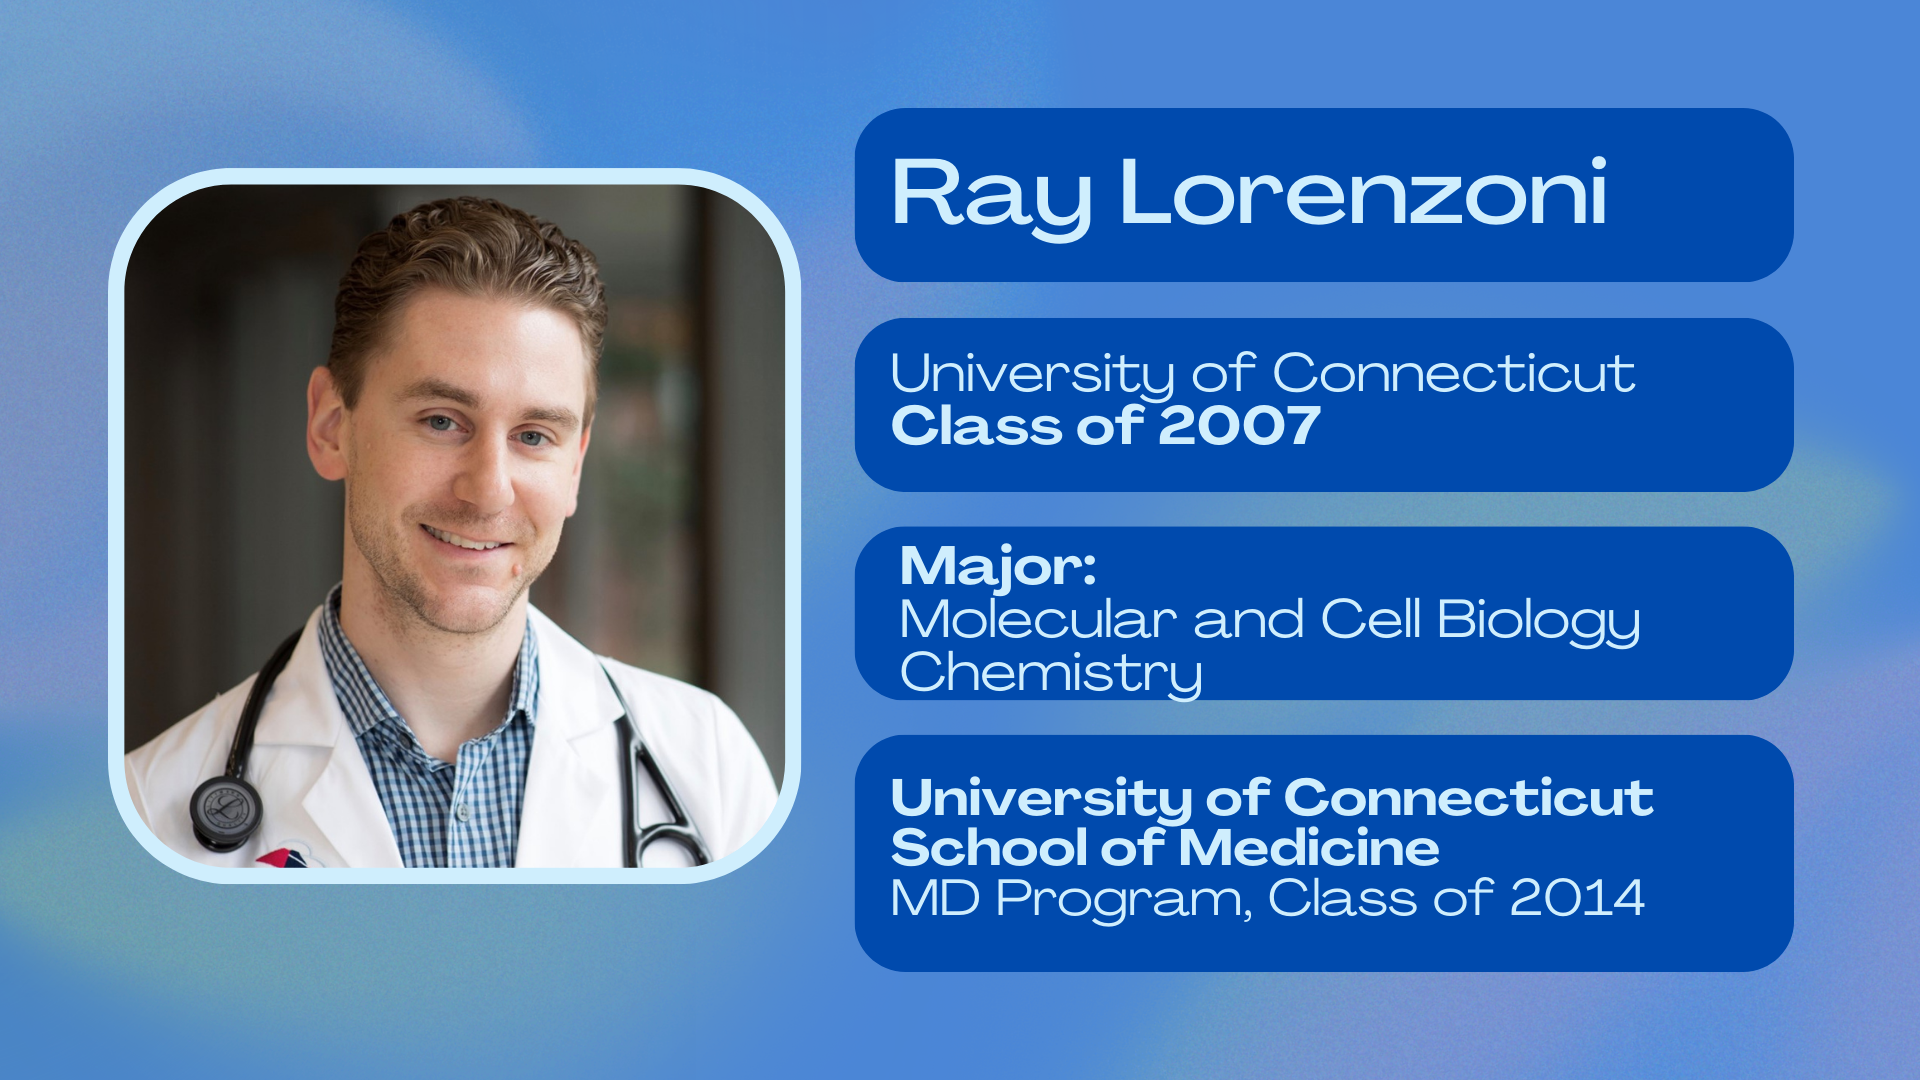 Ray Lorenzoni; University of Connecticut class of 2007; Major: Molecular and Cell Biology + Chemistry; University of Connecticut School of Medicine class of 2014 MD Program